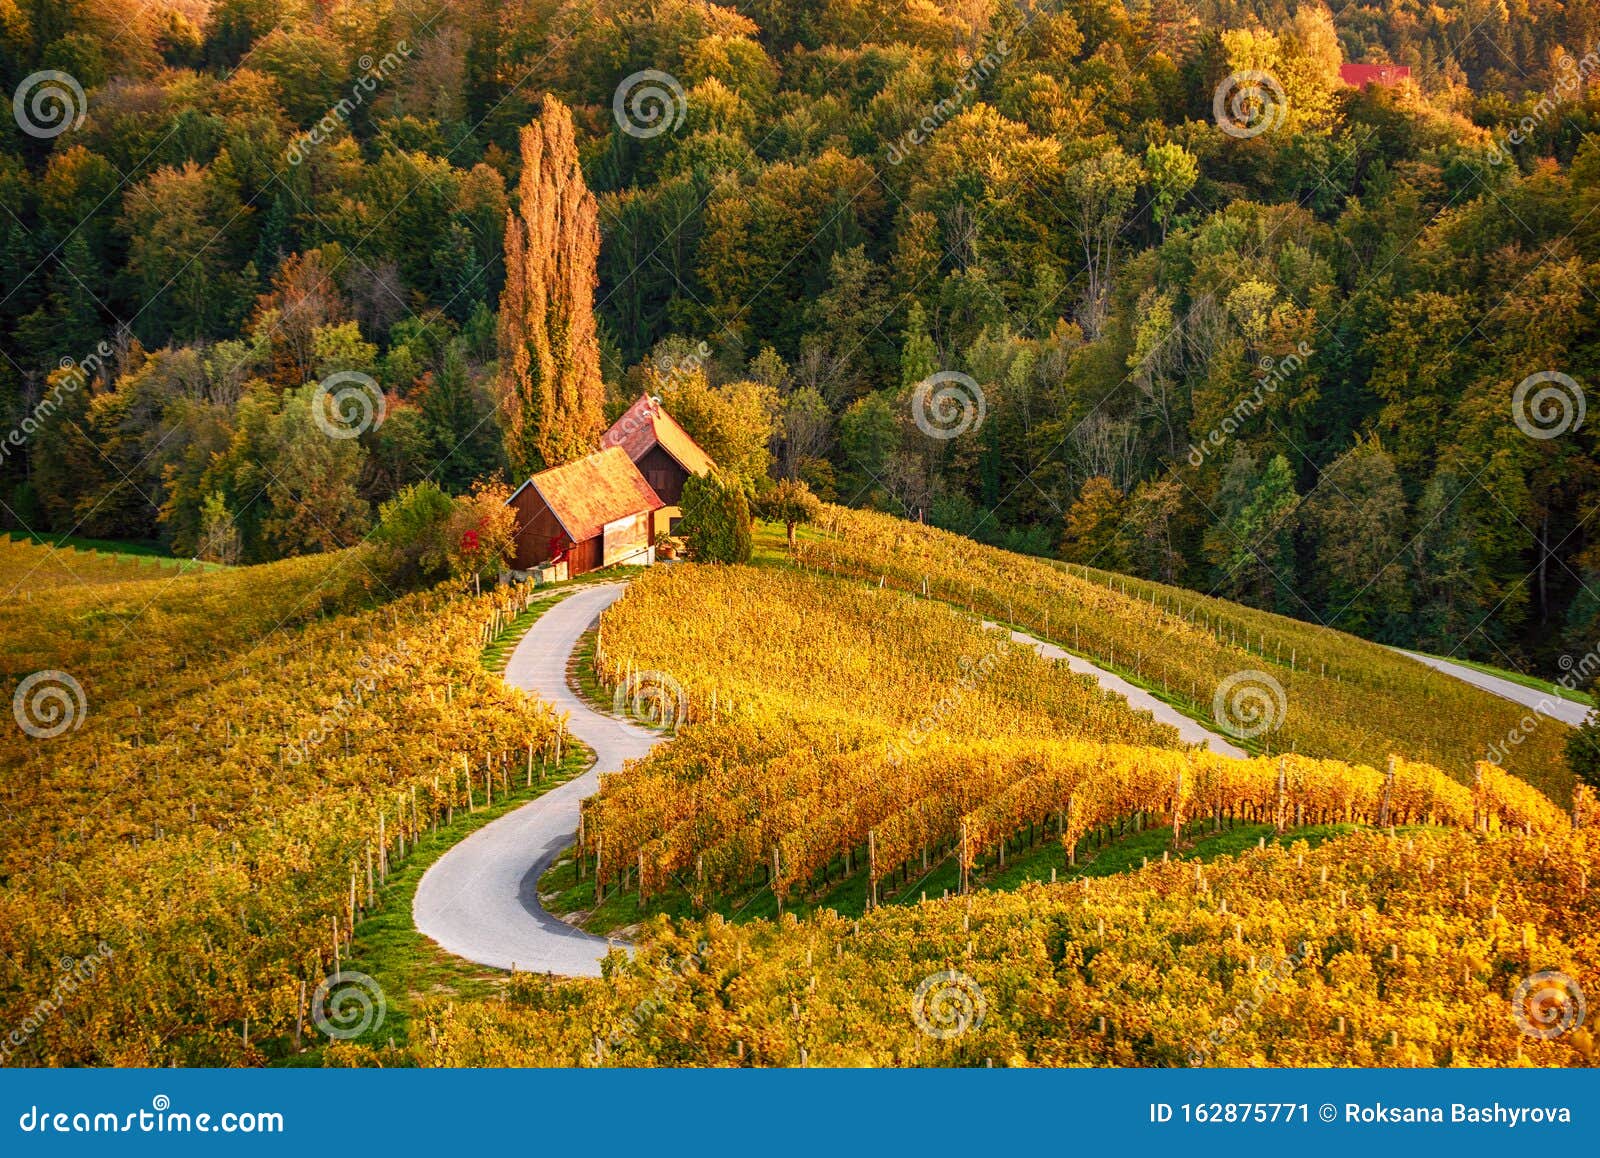 Heart Shaped Wine Road in Slovenia Stock Image - Image of grape ...